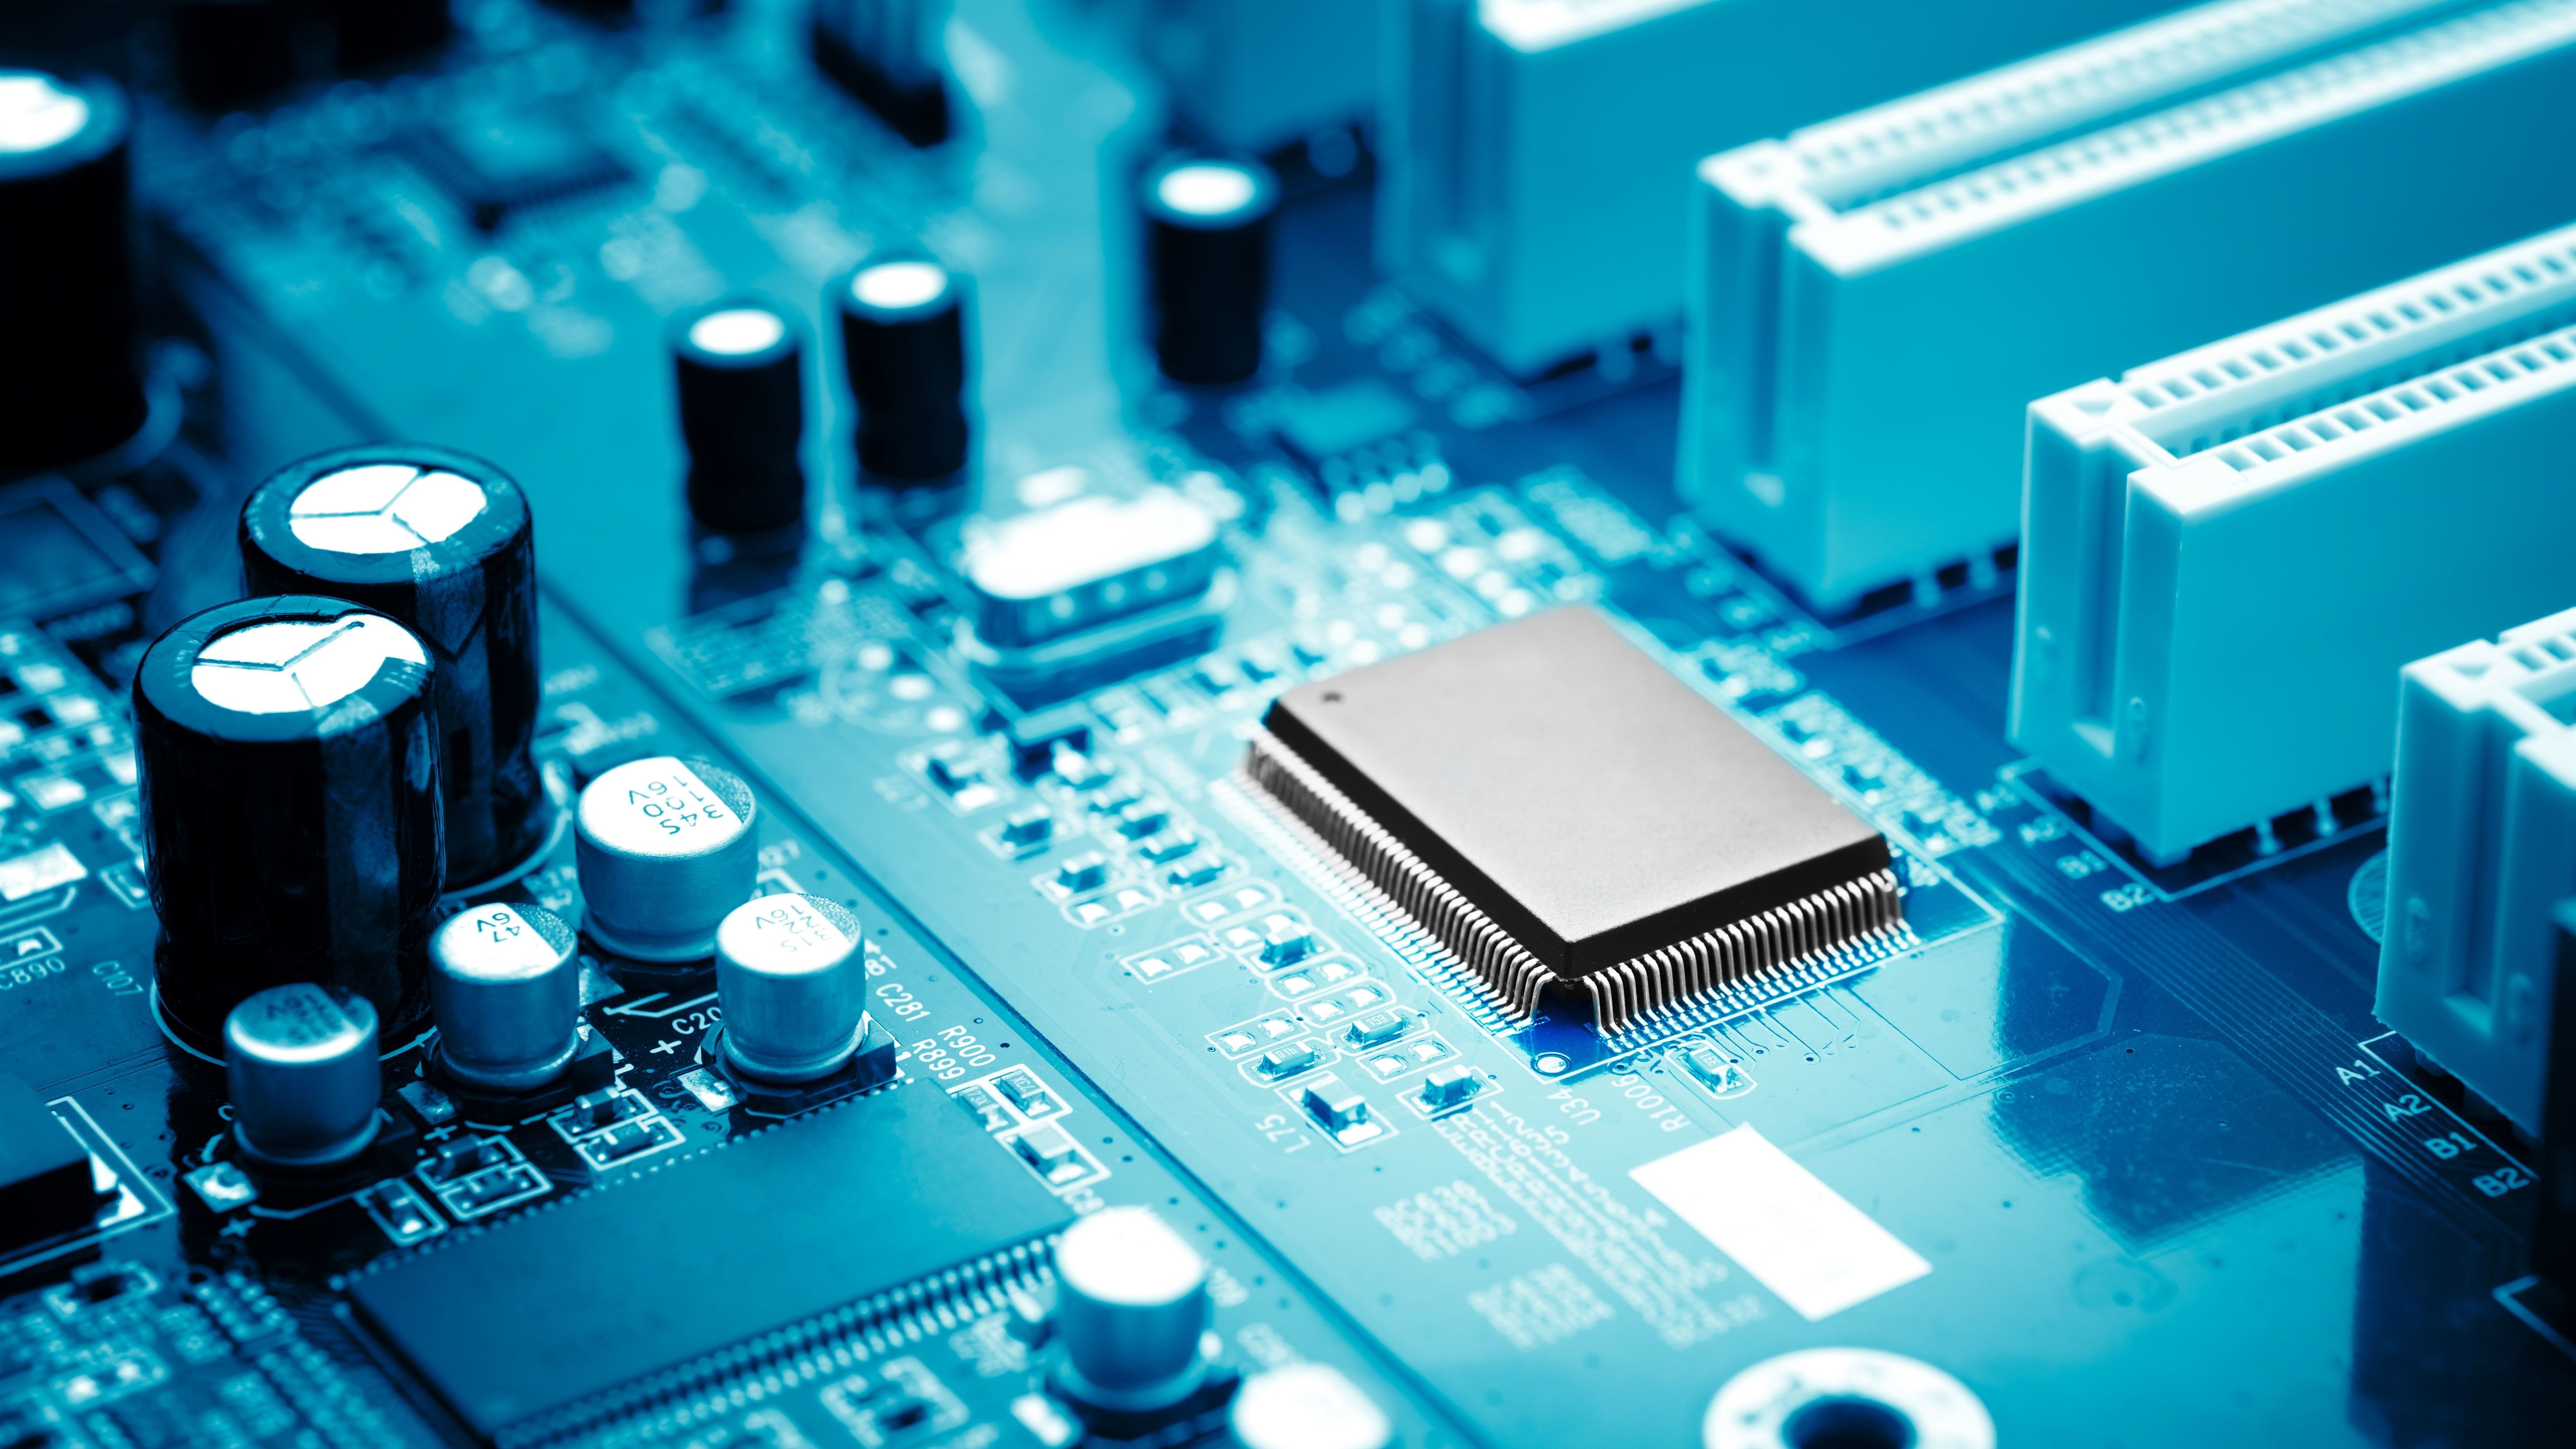 Wallpapers PC mainboard, electronic components 5120x2880 UHD 5K